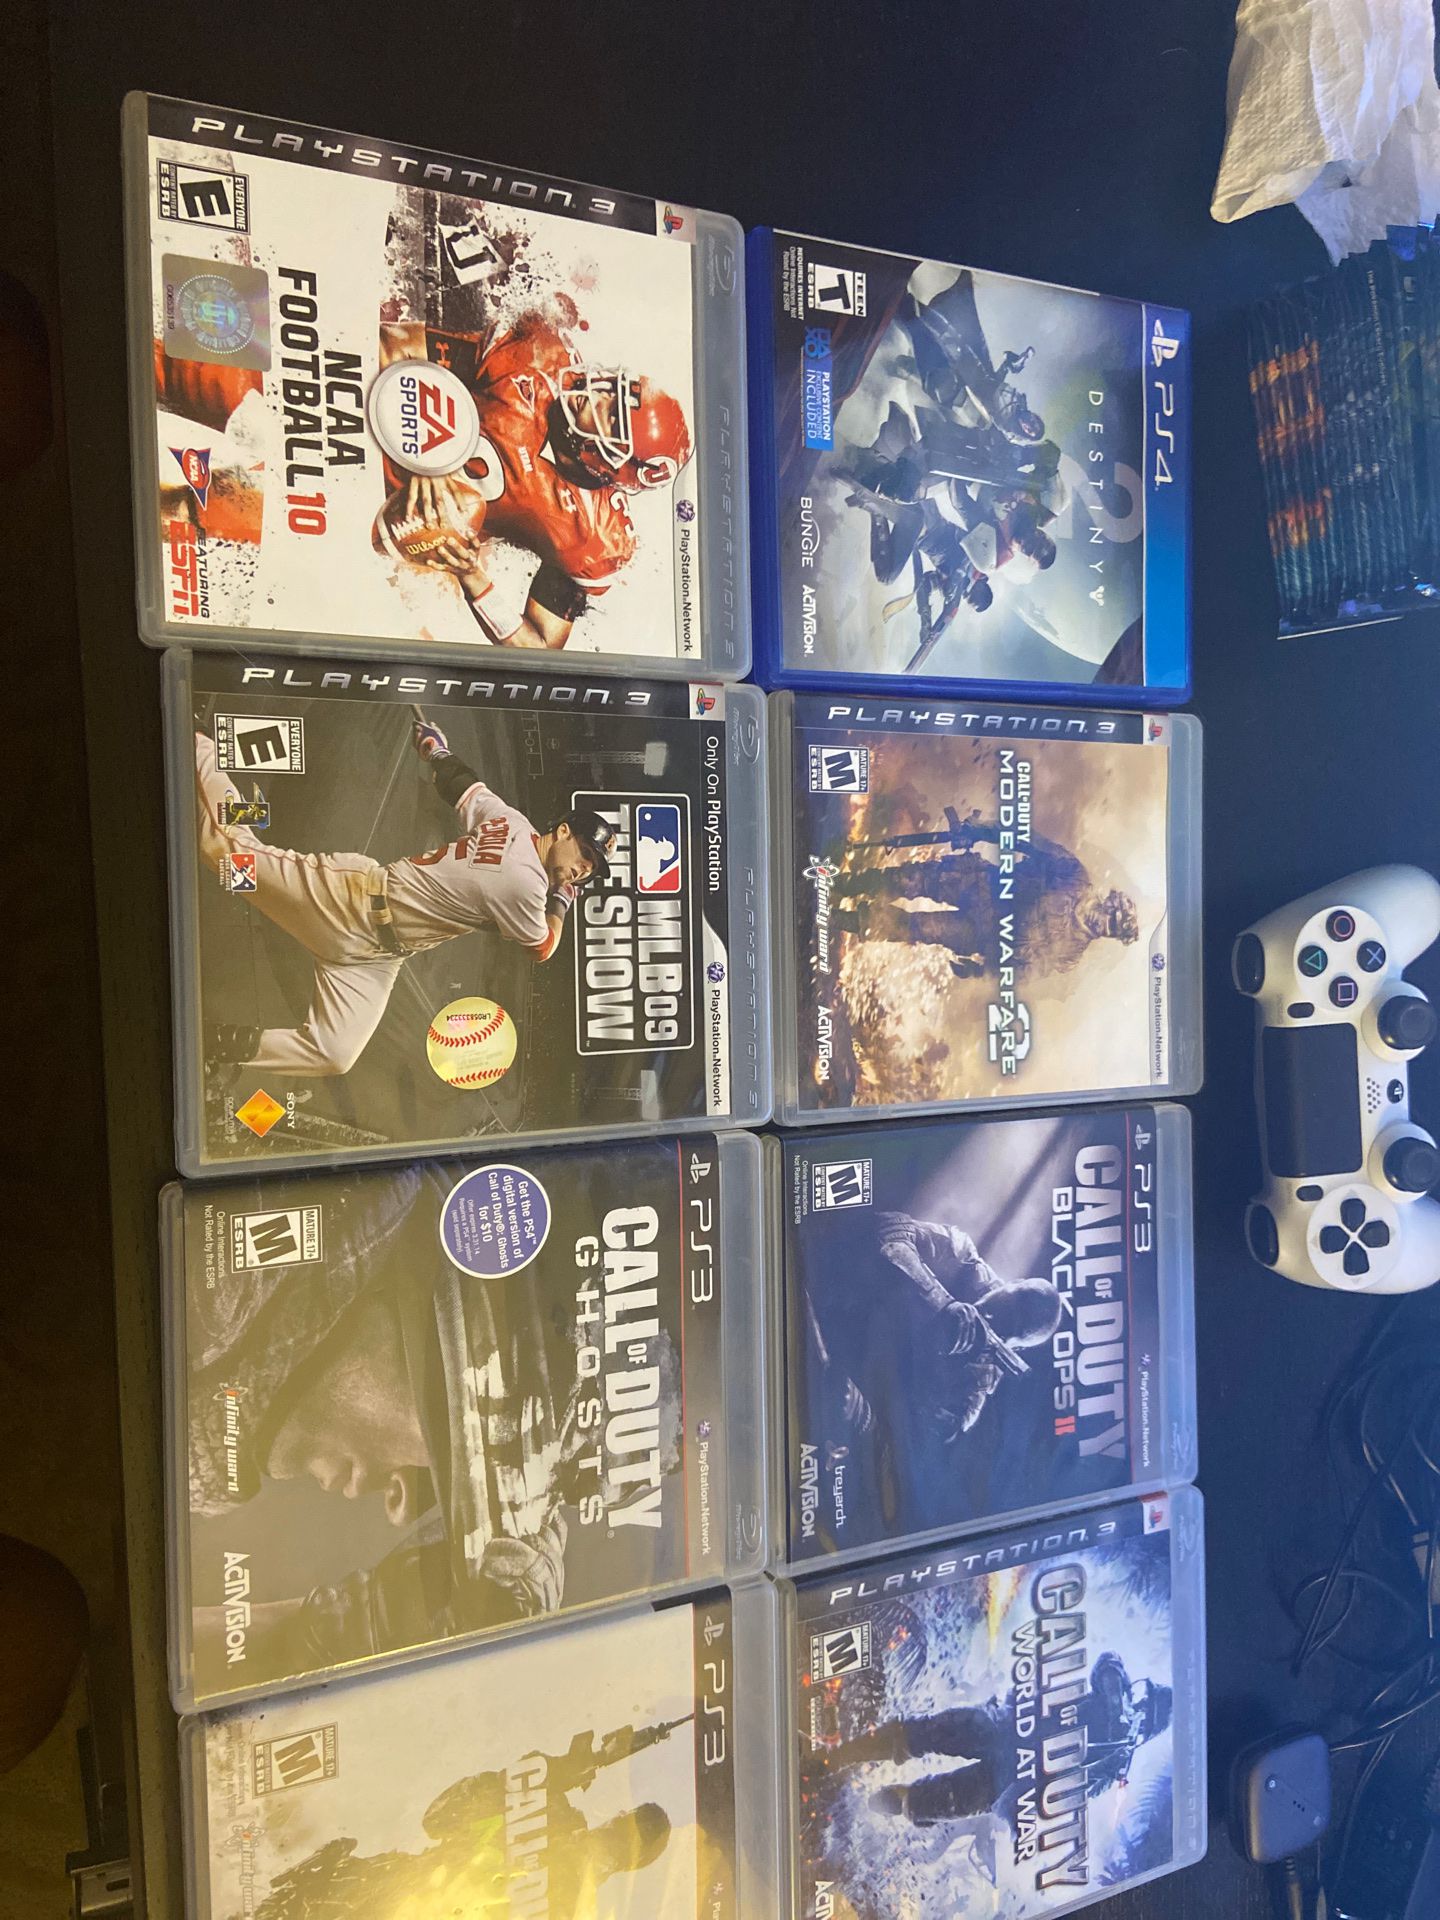 7 PS3 games 1 PS4 game 1 Xbox game 2 Xbox 360, ps4 controllers.